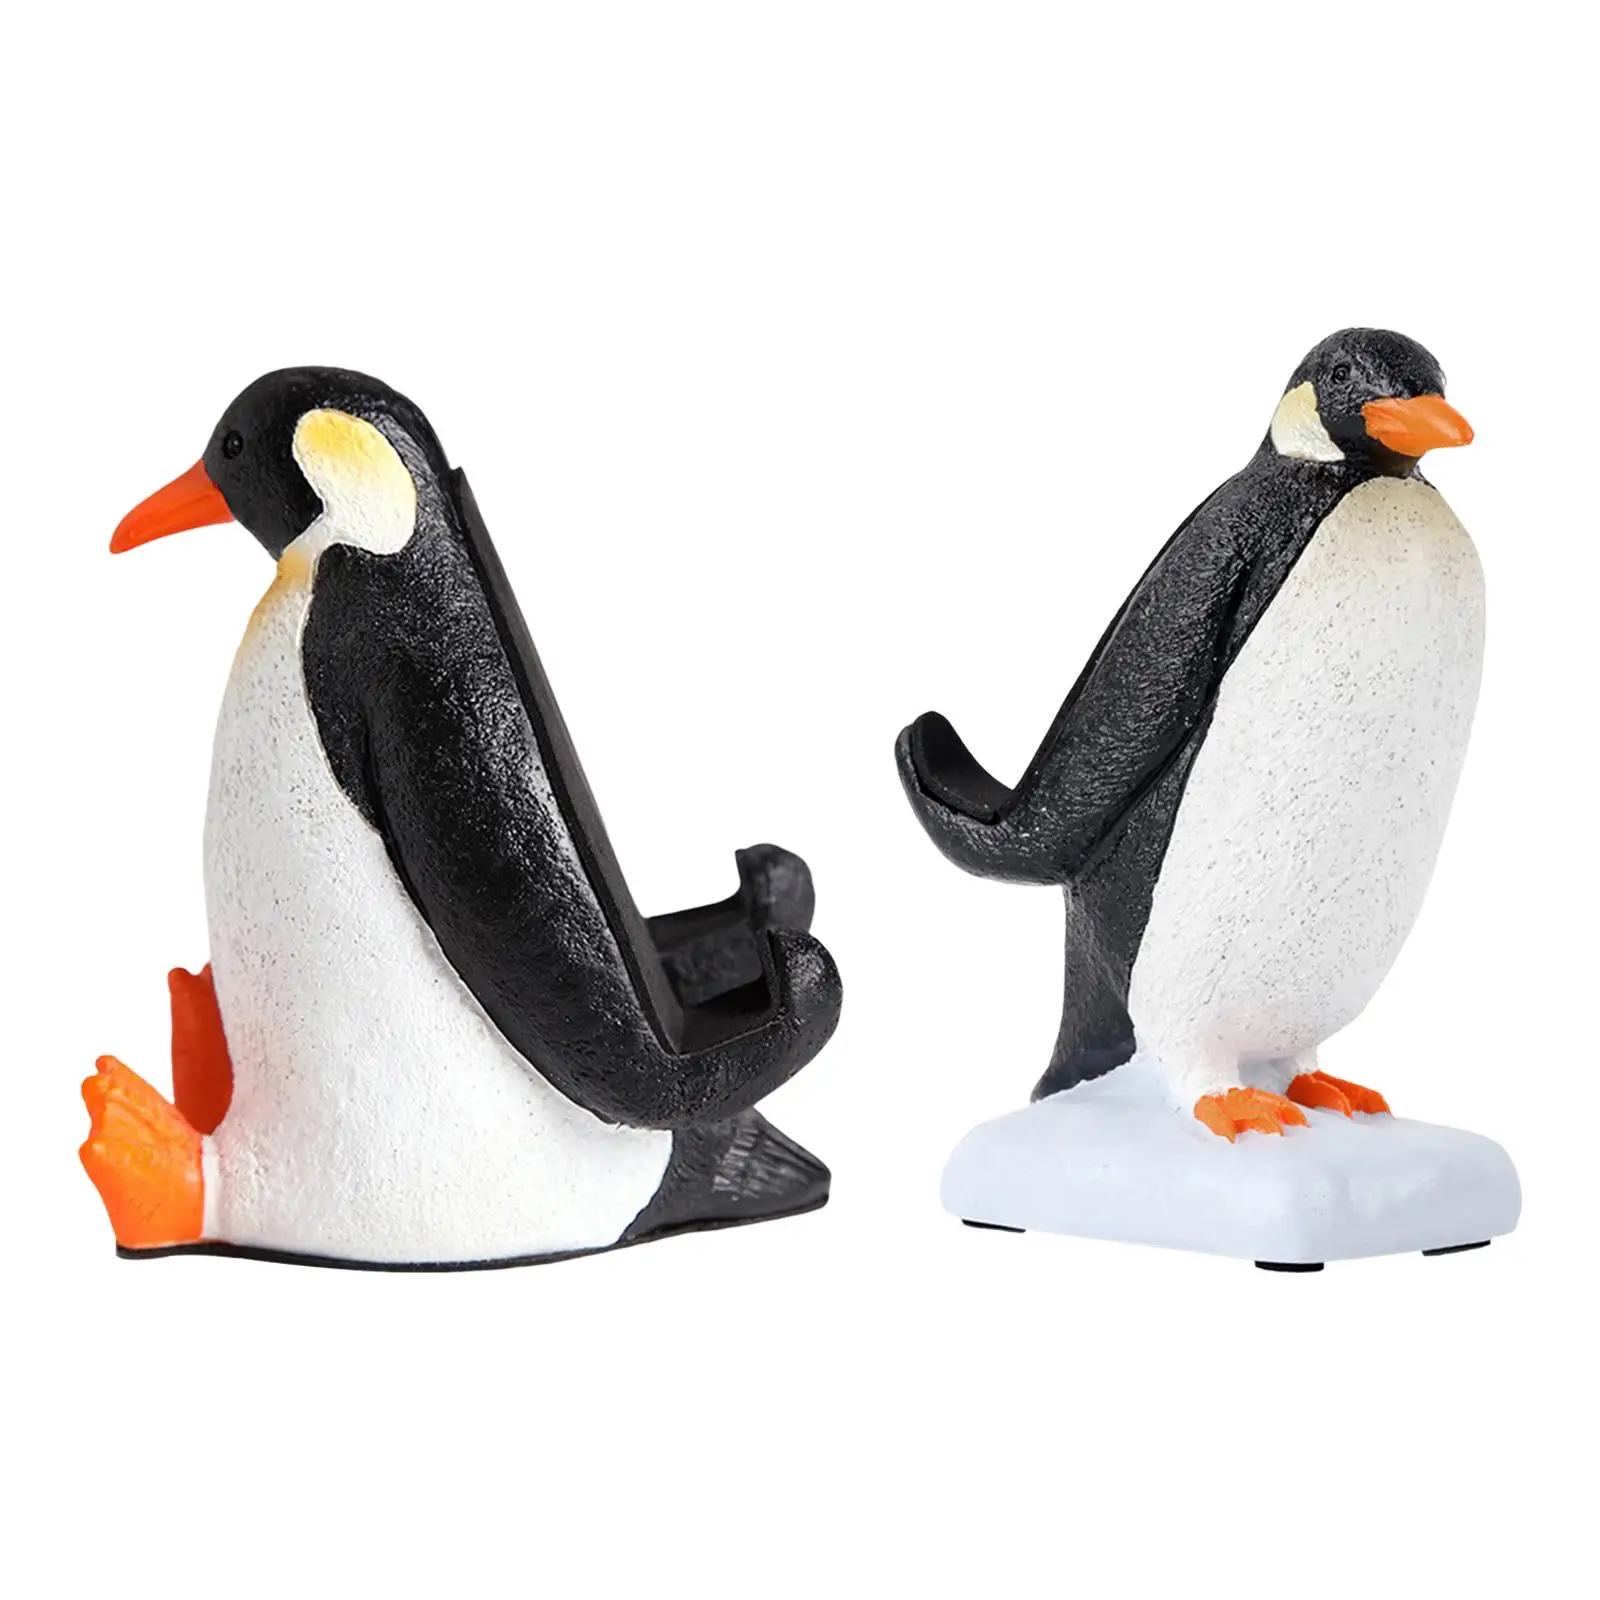 Creative Animal Penguin Statue Desktop Phone Holder Stand Support Cradle Crafts Ornaments Decoration for Office Tabletop Home